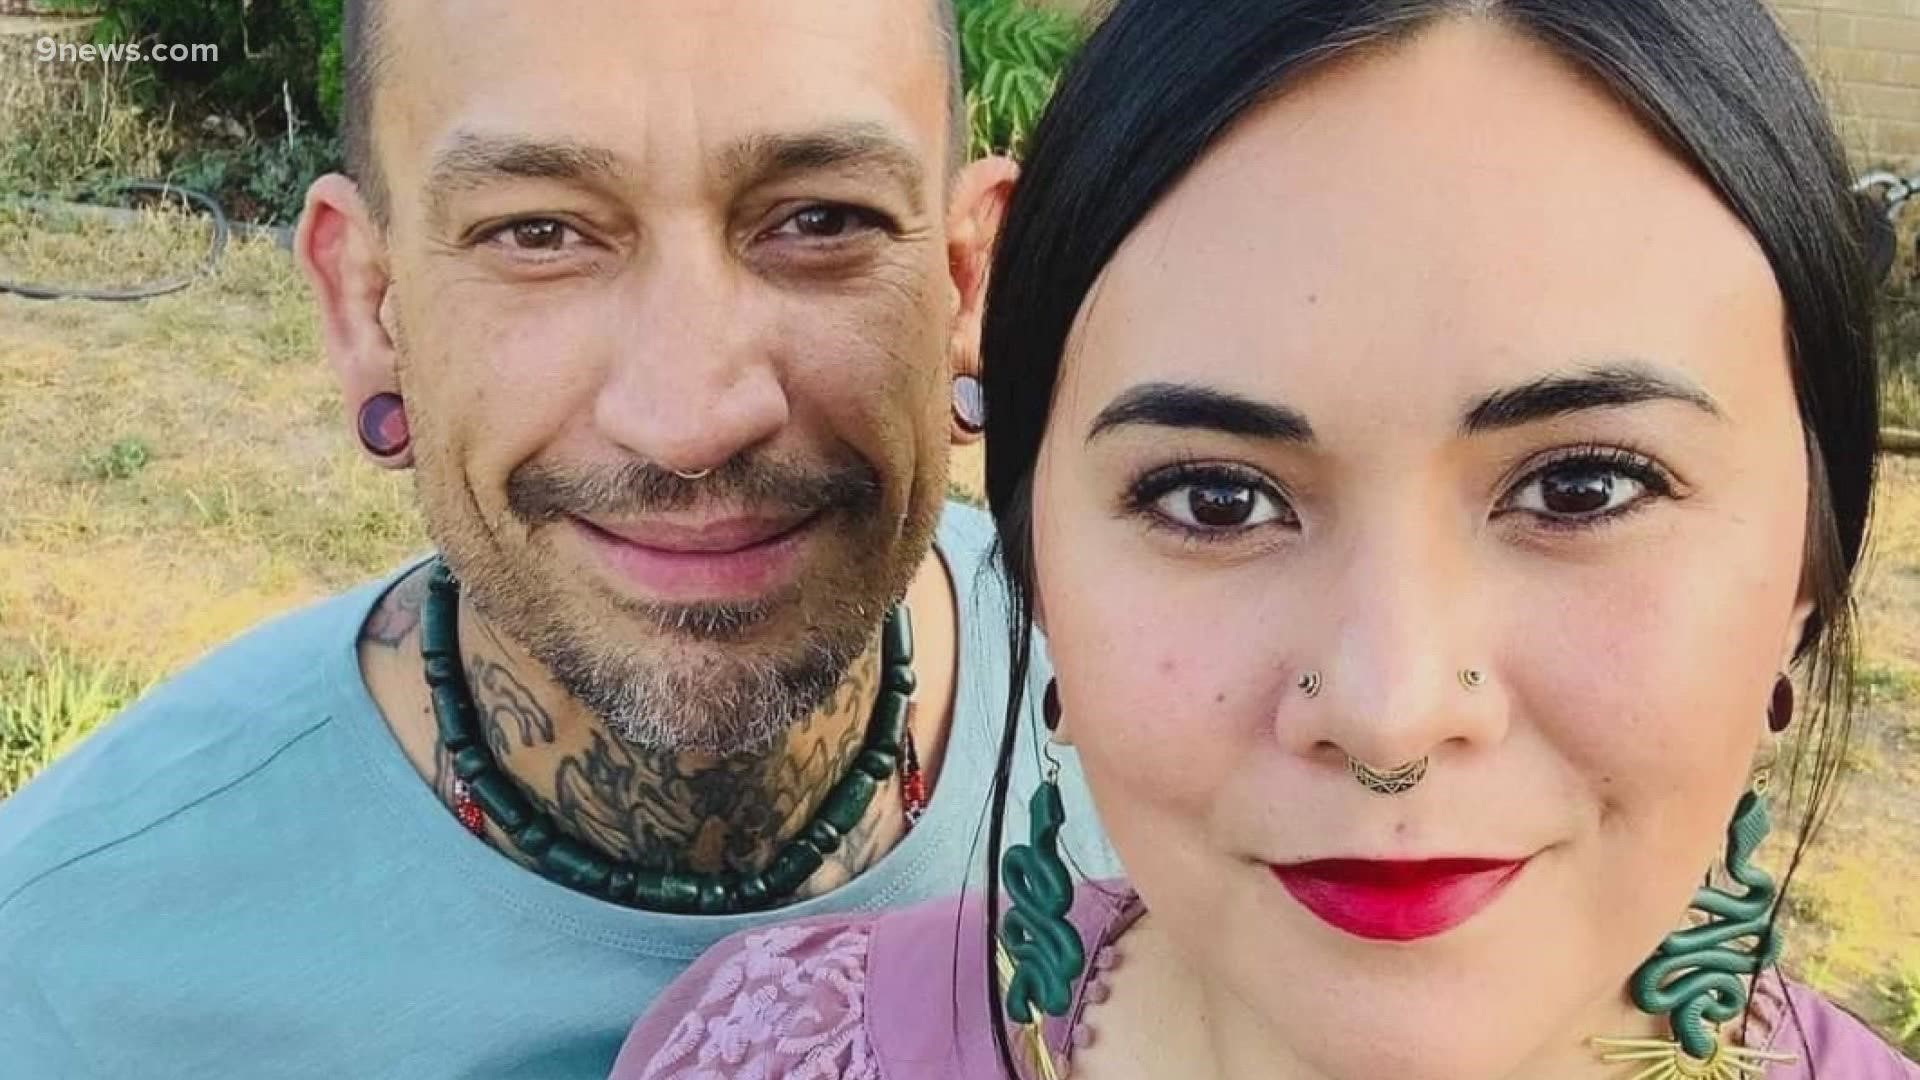 Alyssa Gunn-Maldonado and her husband were both shot at Sol Tribe, the Broadway tattoo shop where they worked. A customer said Alyssa completed Jimmy.